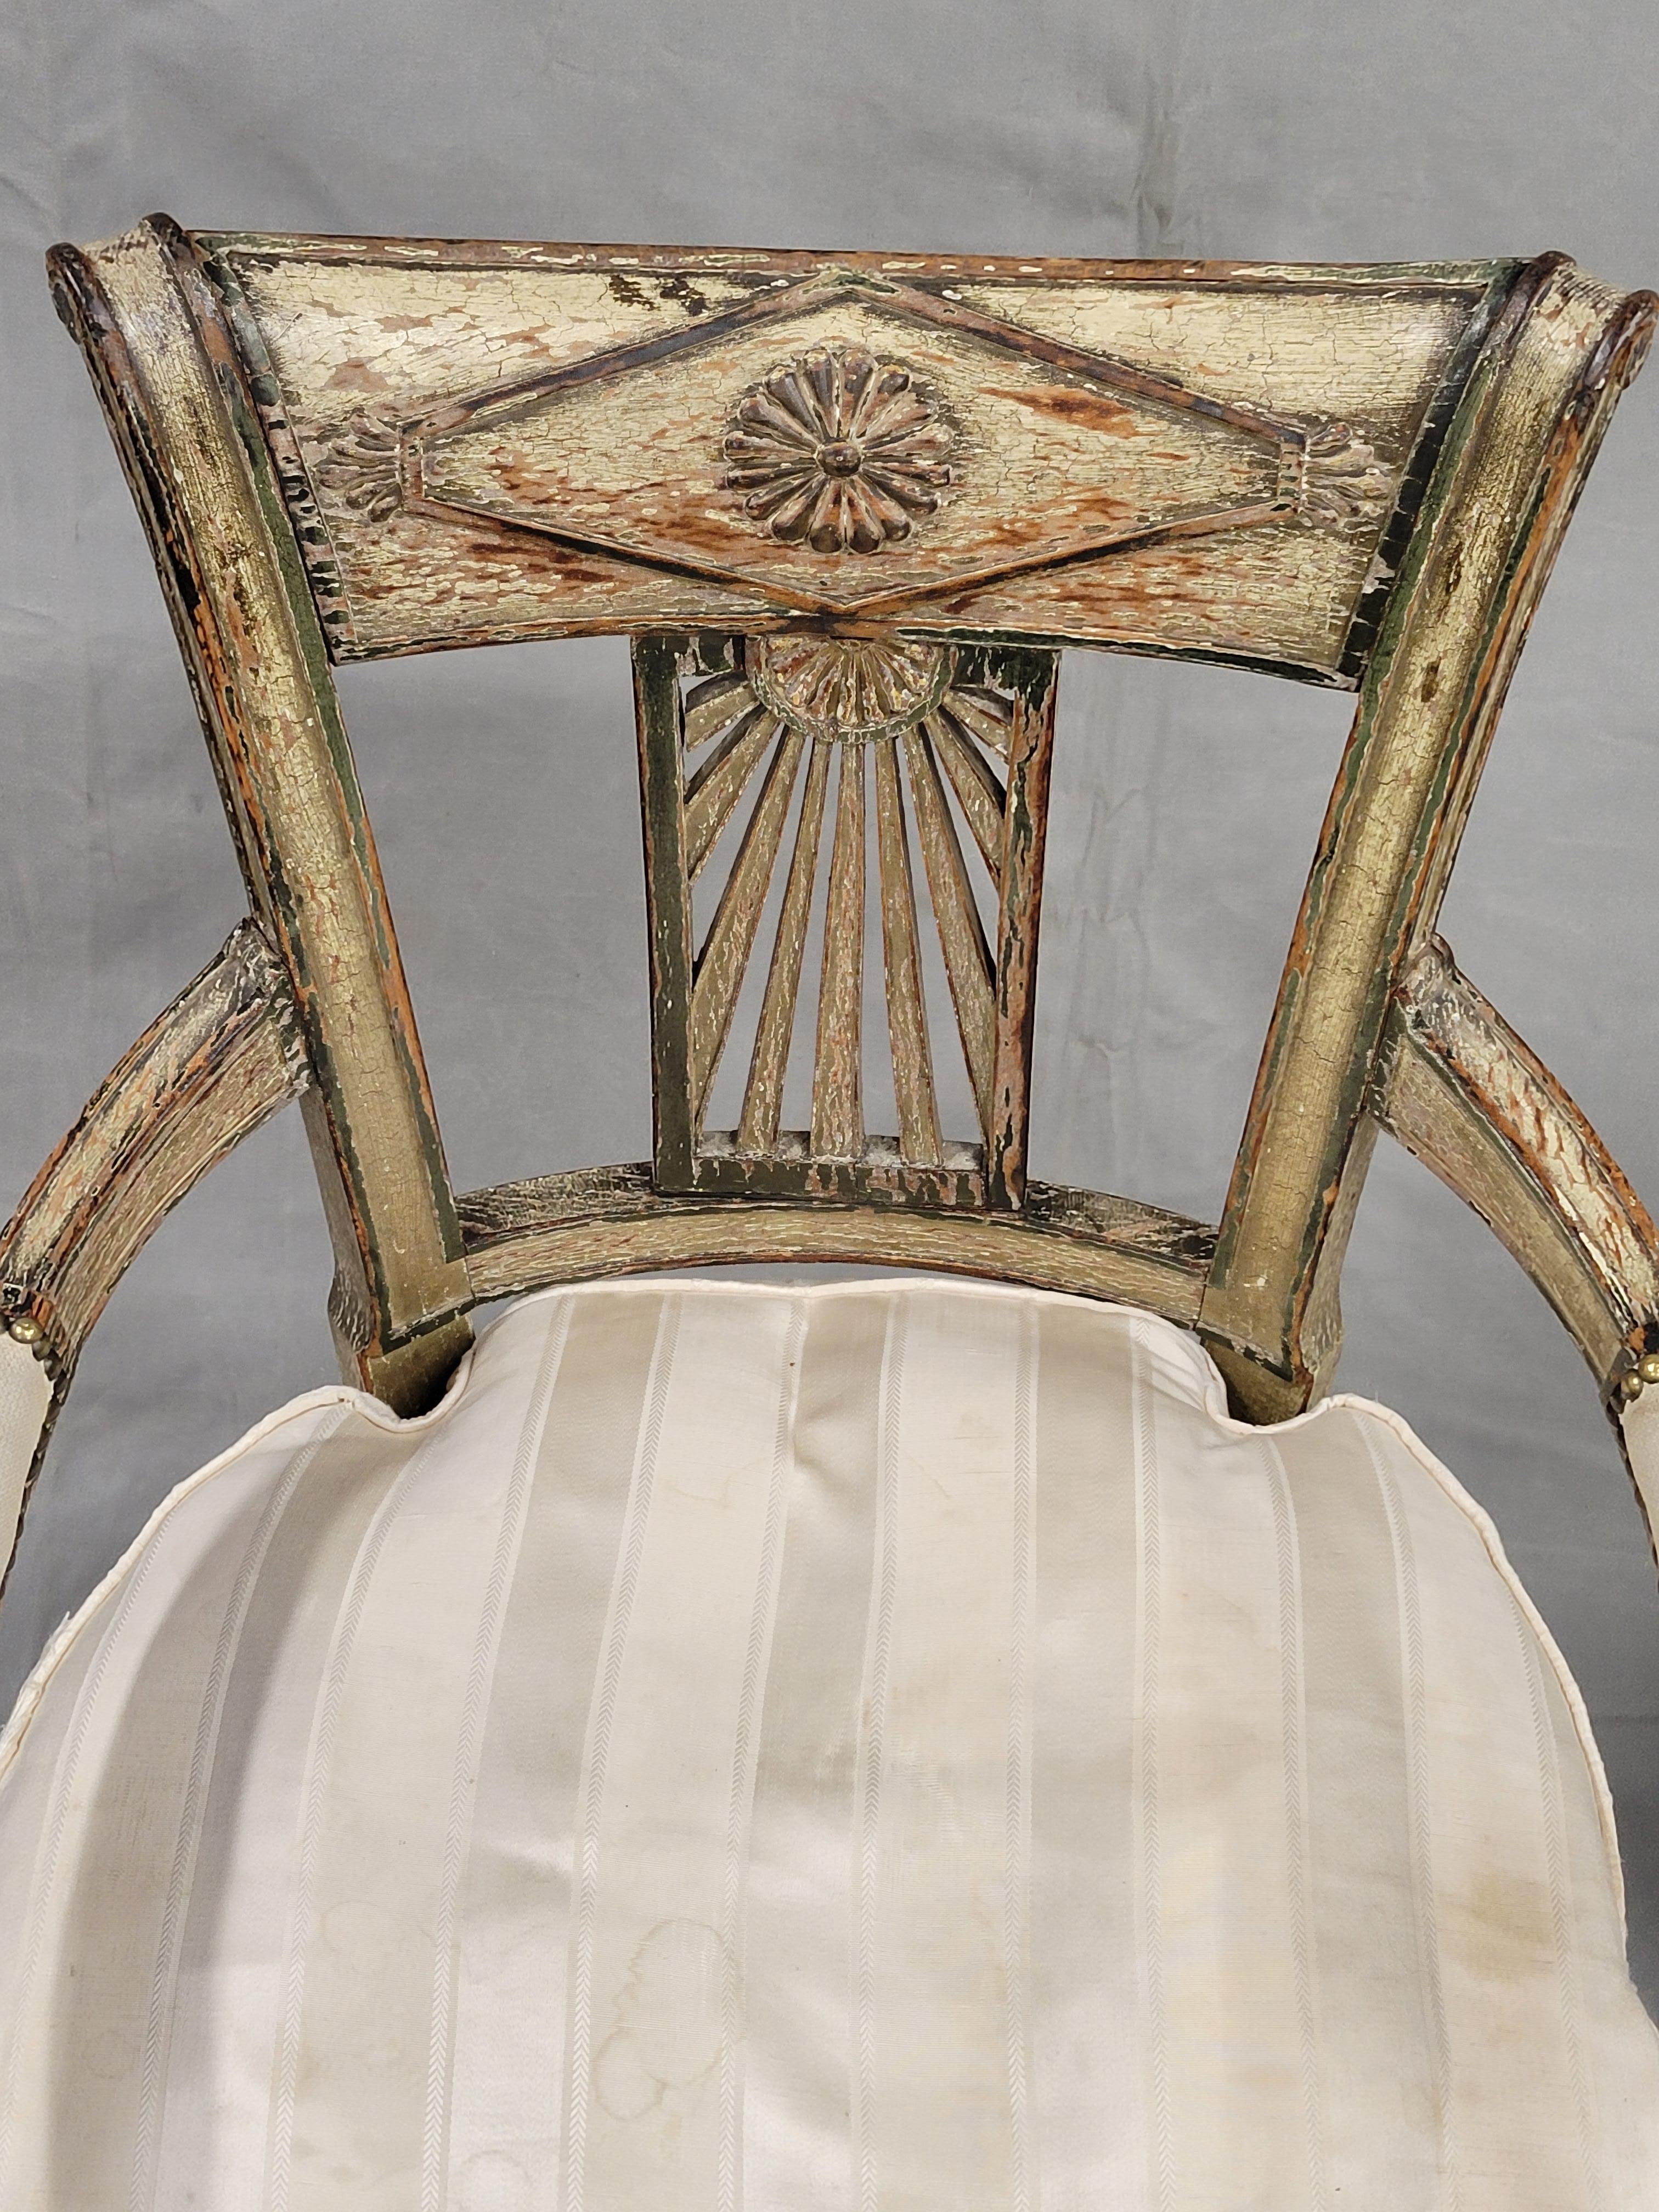 Antique Maison Jansen Style French Louis XVI Painted Fauteuil Chairs - a Pair For Sale 6